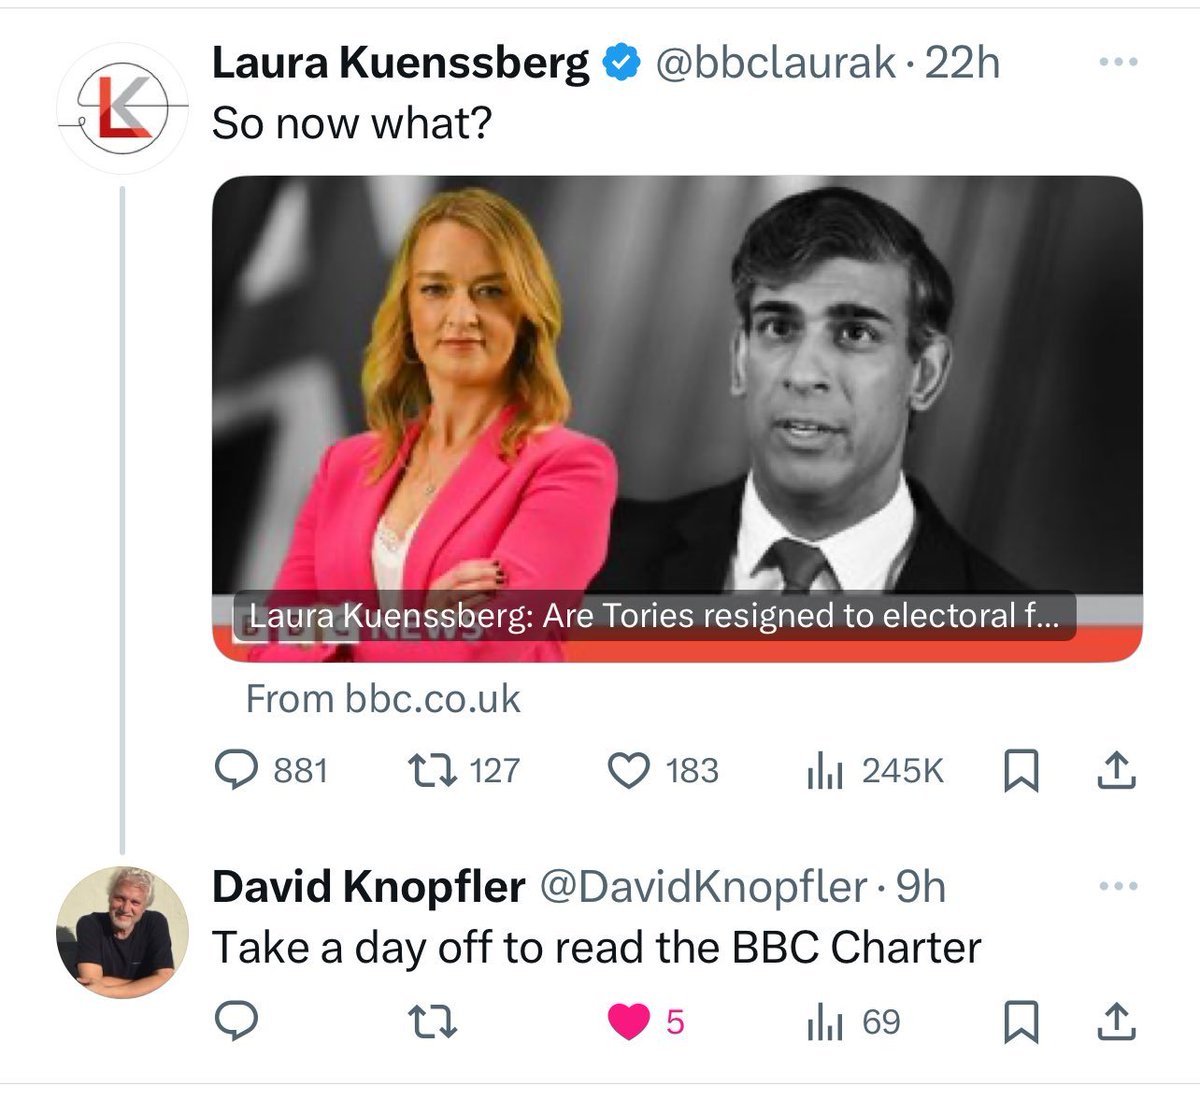 Given the dreadful and biased election coverage by Laura Kuenssberg, will Laura be taking up David's advice? For example was there a reason why @BBCPolitics interviewed 2 Tories who came 3rd and no one from the Lib Dems who beat them @bbclaurak @LibDems #bbclaurak @DavidKnopfler